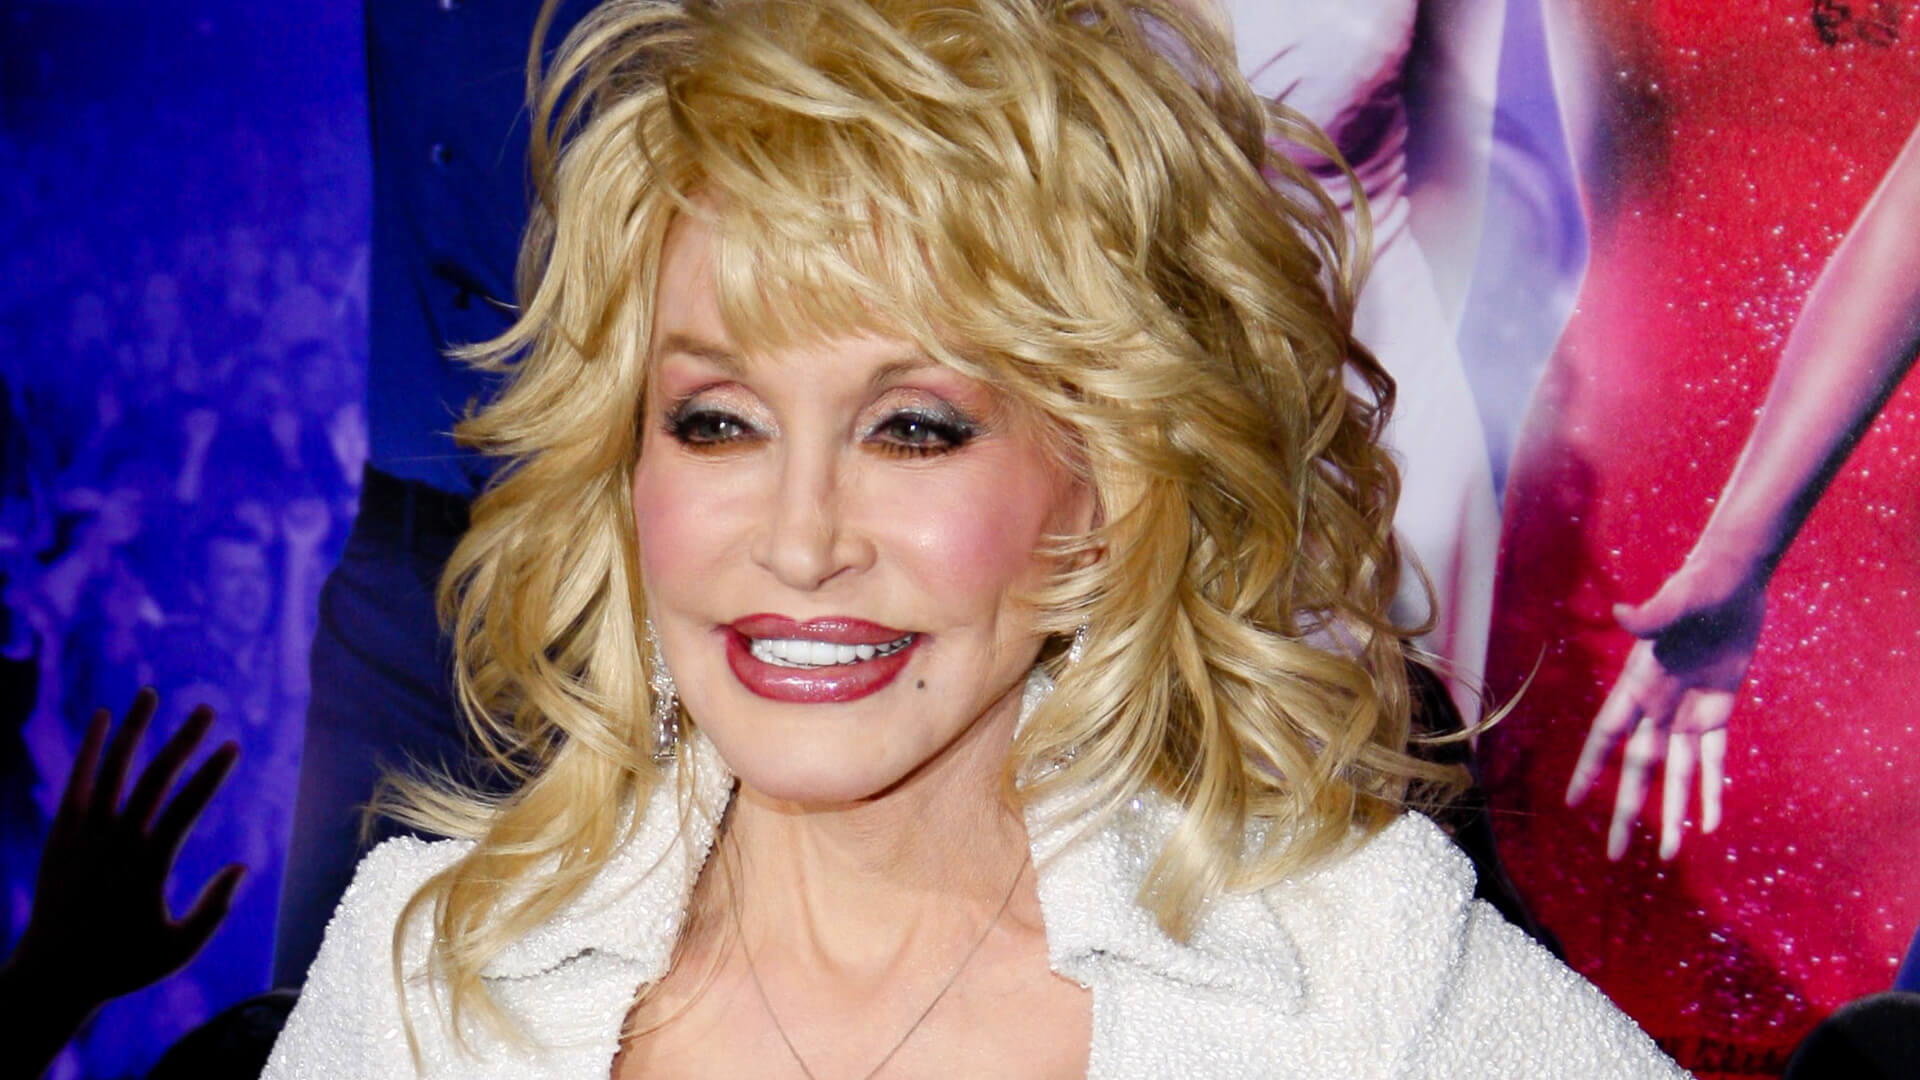 How much is Dolly Parton's net worth?